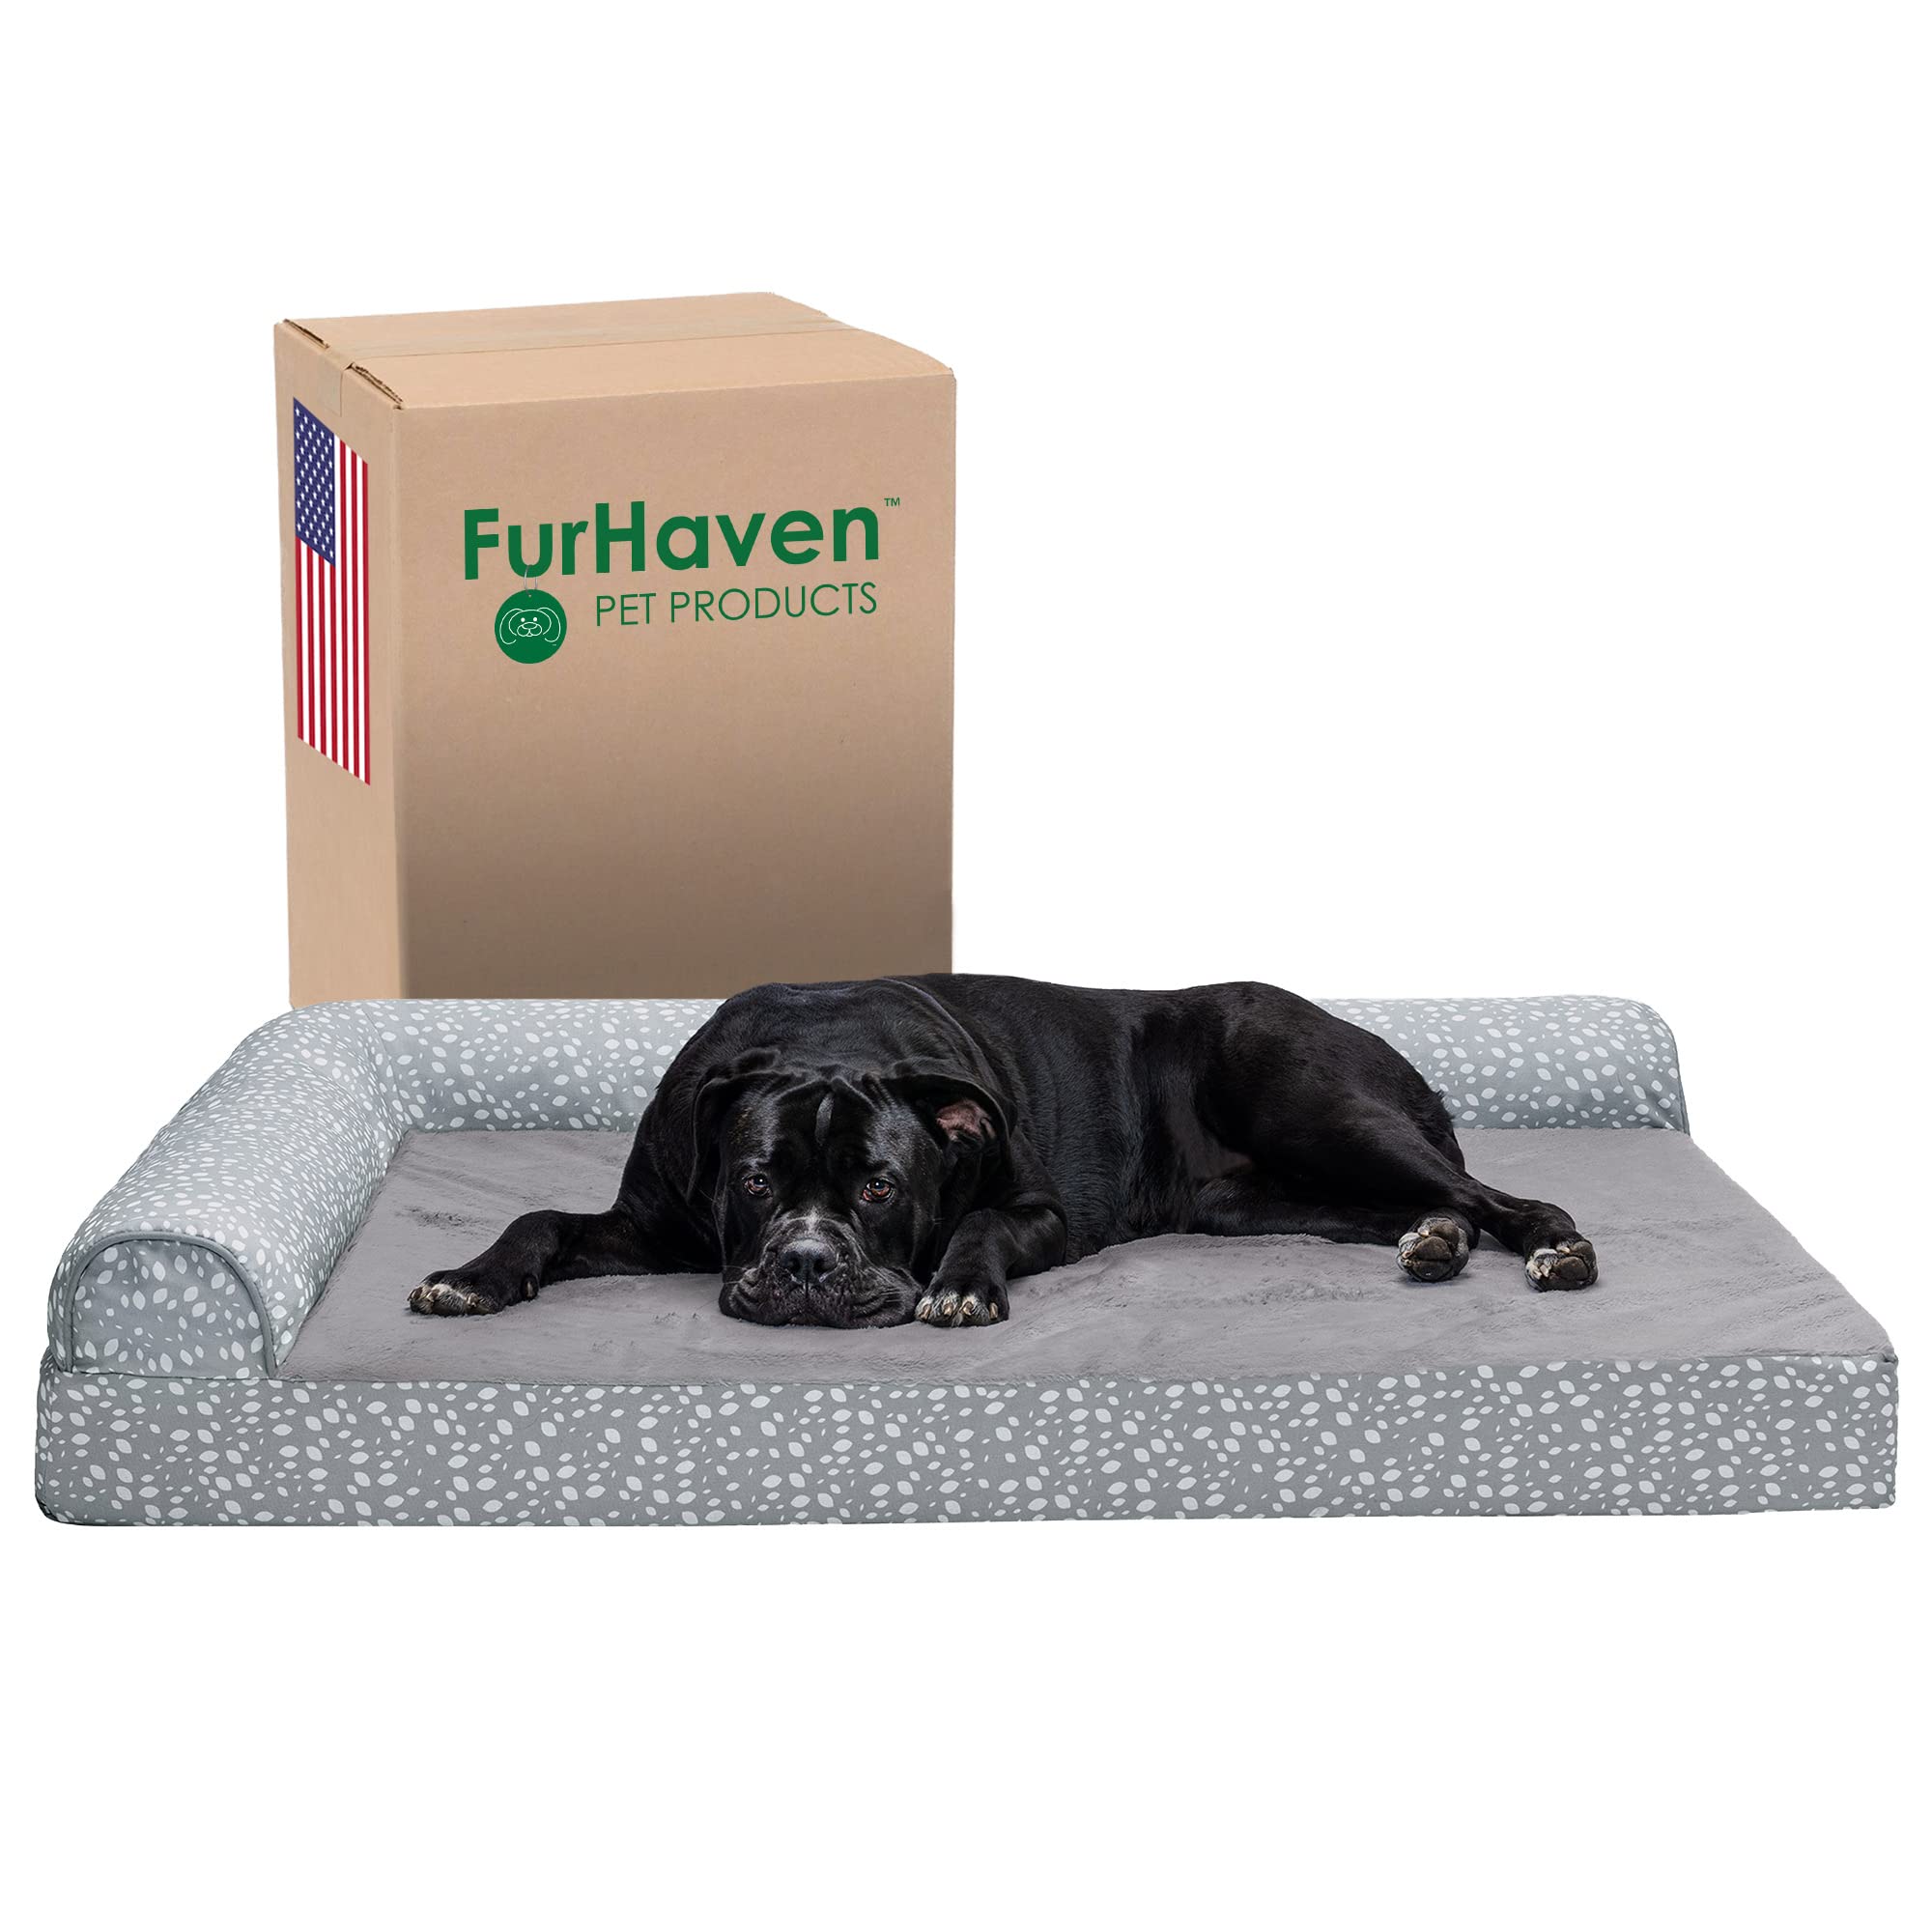 Furhaven XXL Orthopedic Foam Dog Bed w/ Removable Bolsters & Washable Cover $60 + Free Shipping